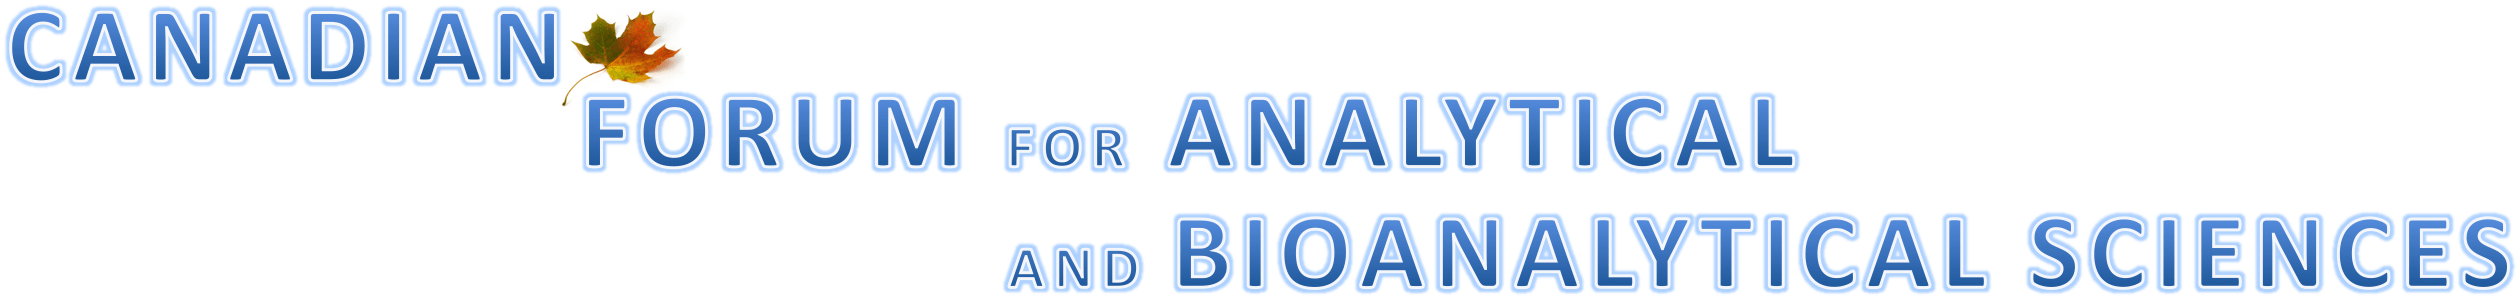 Canadian Forum for Analytical and Bioanalytical Sciences